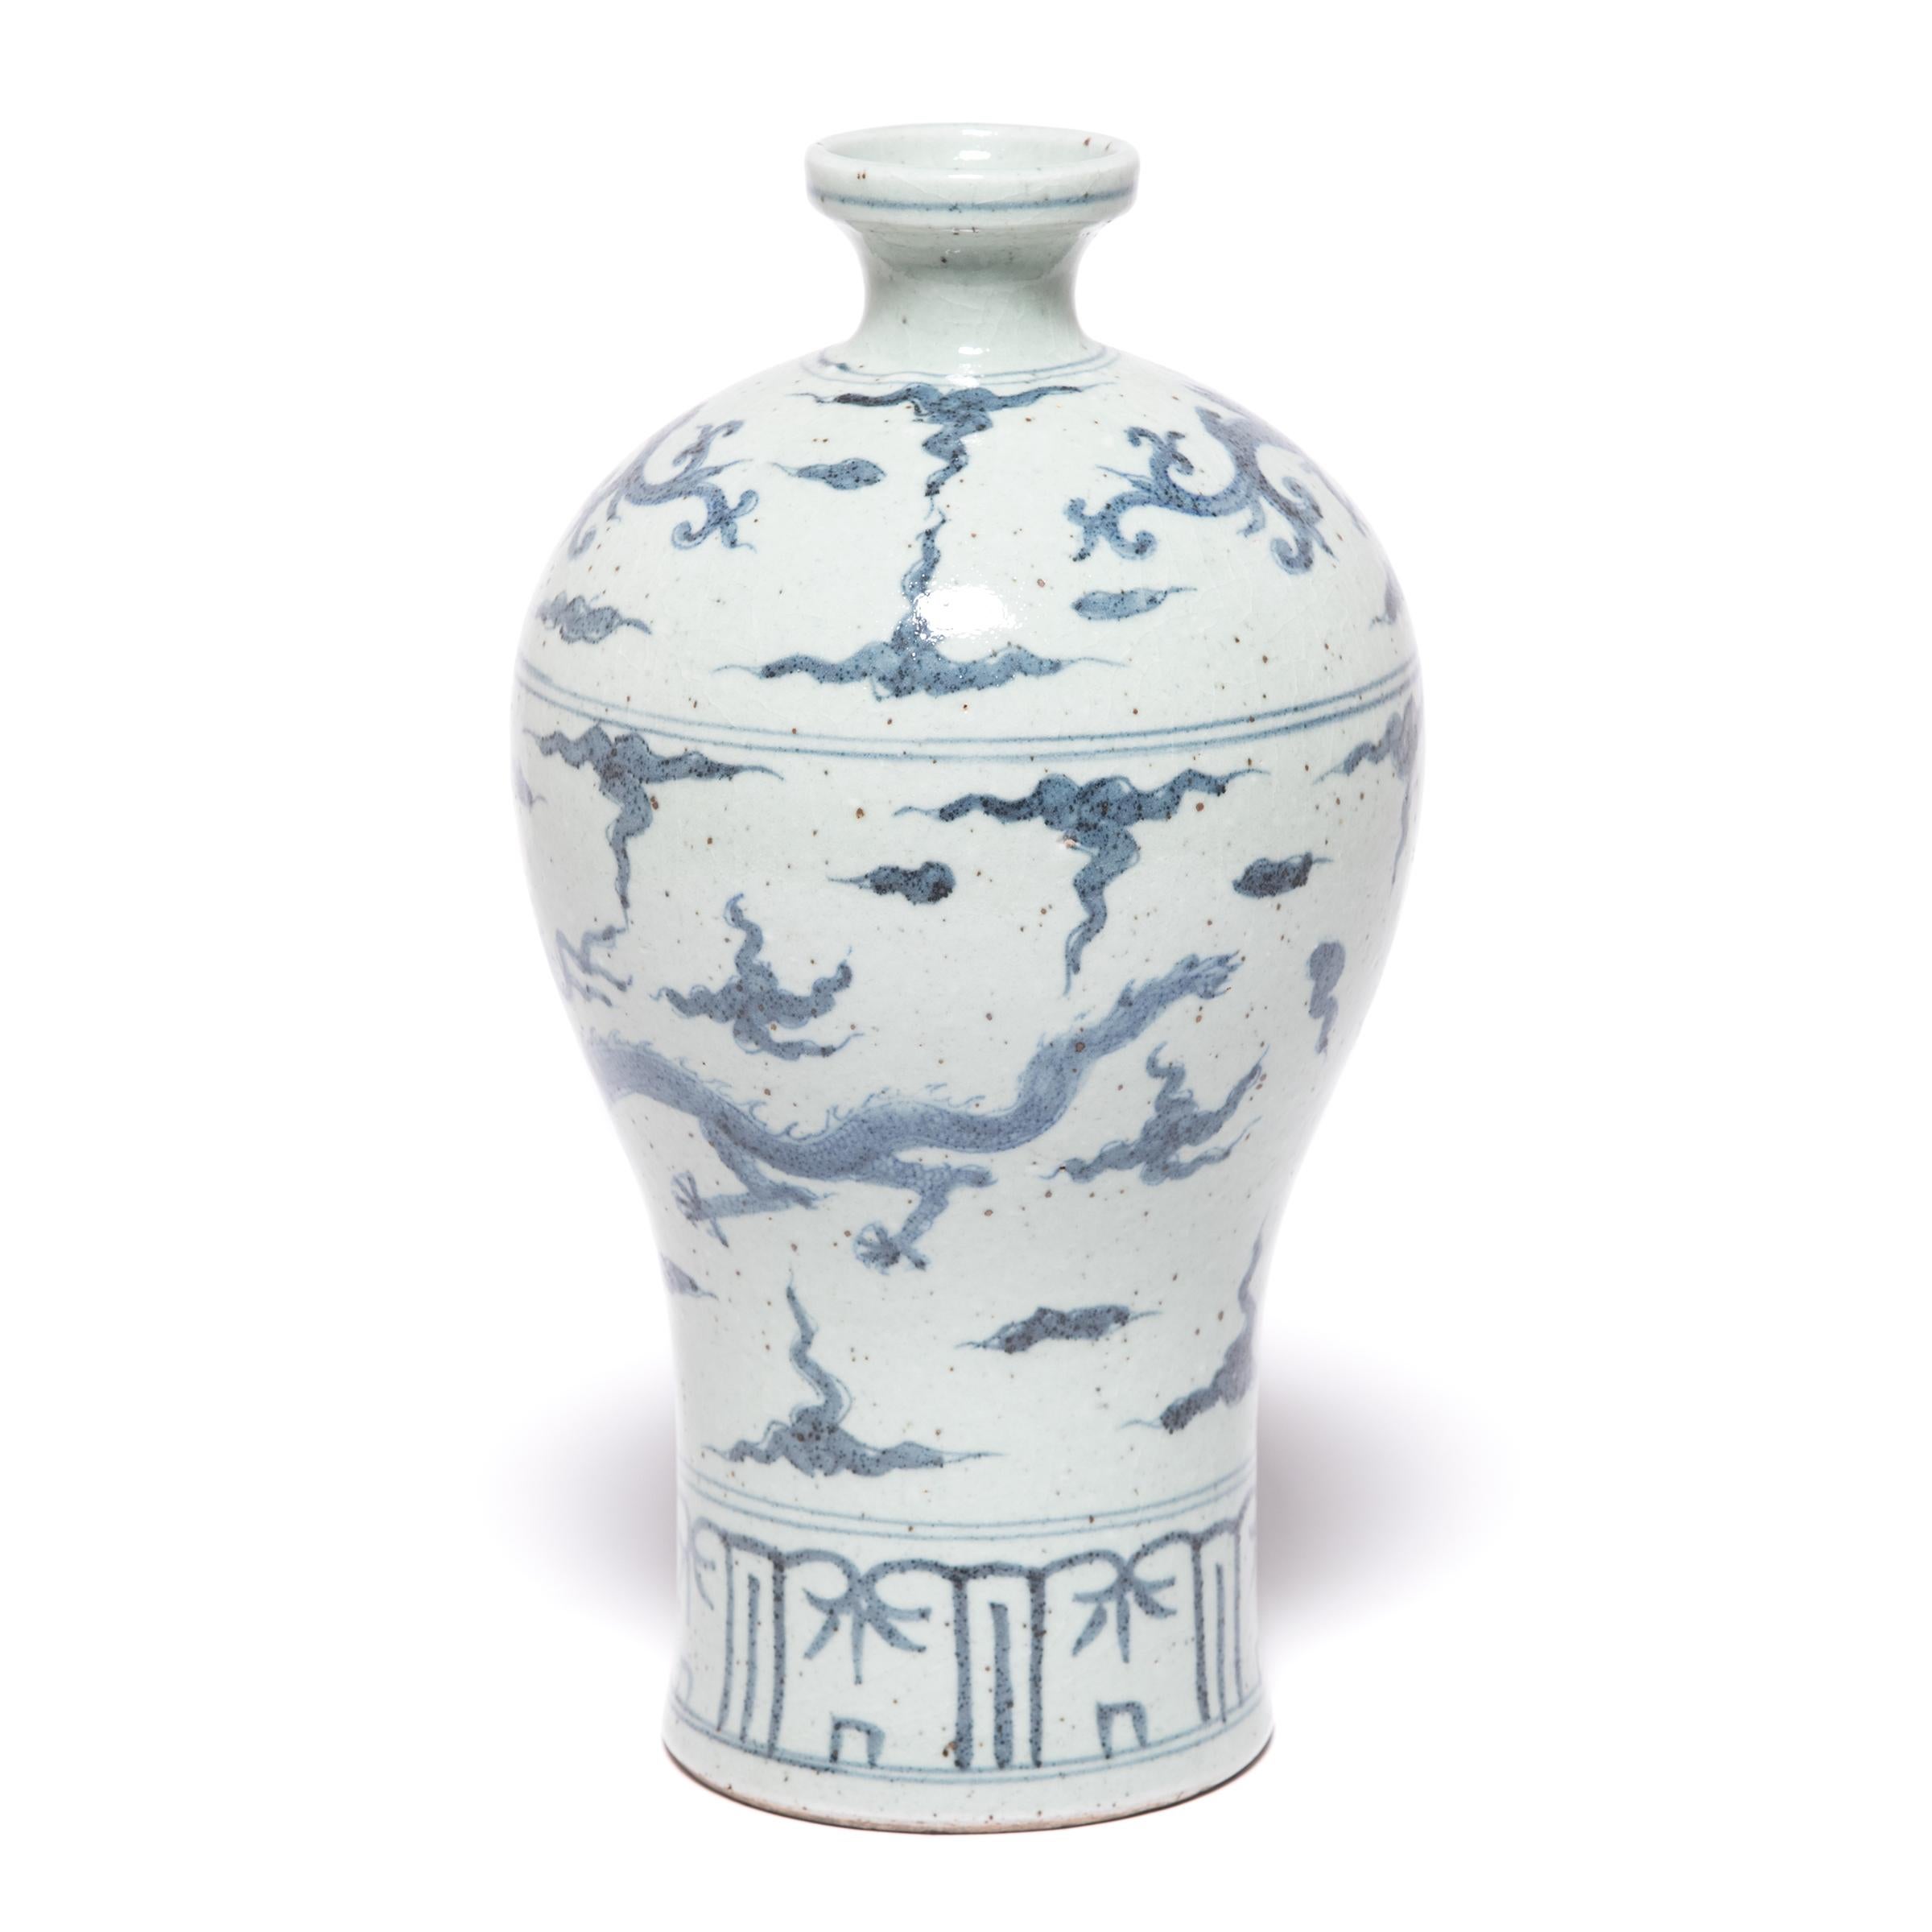 Chinese blue-and-white porcelain has inspired ceramists worldwide since cobalt was first introduced to China from the Middle East thousands of years ago. Made in Beijing, this contemporary version of a meiping vase showcases traditional